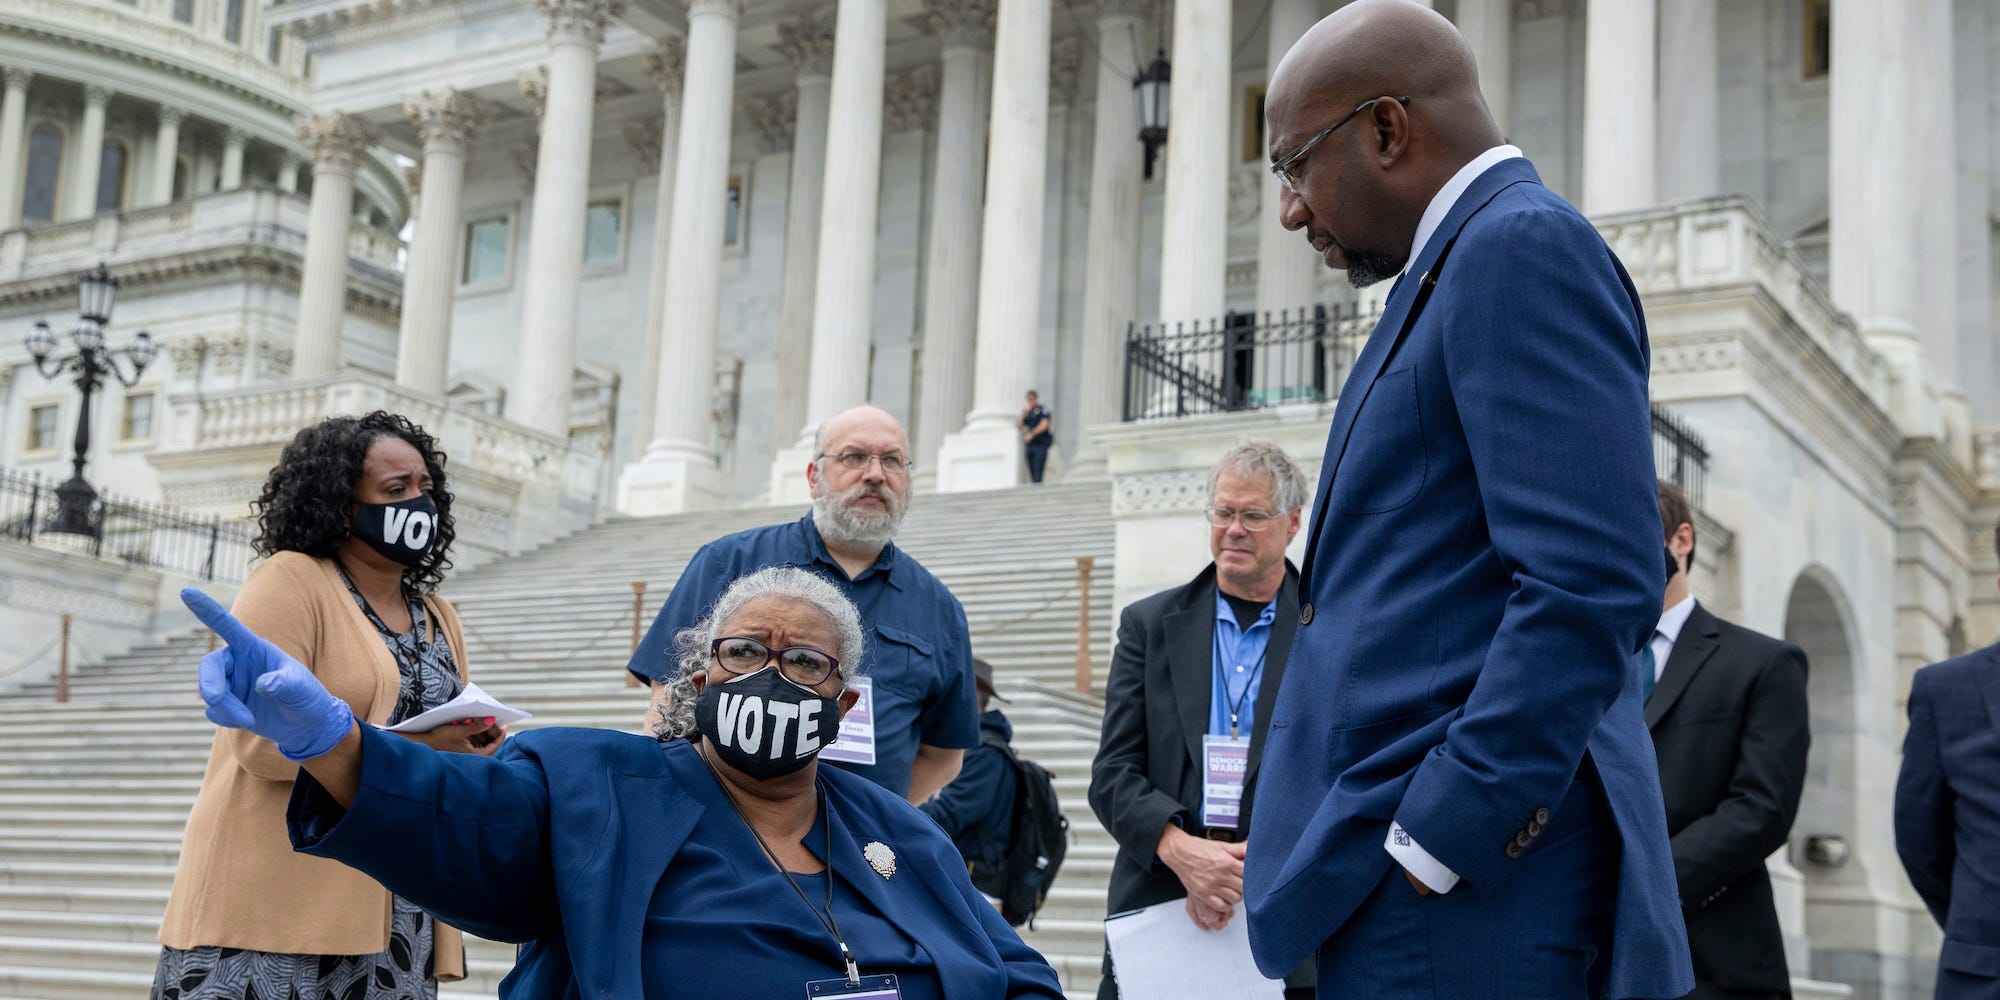 Sen. Raphael Warnock, D-Ga., meets with Angeline Sutton of Mississippi on Capitol Hill in Washington, Tuesday, Aug. 3, 2021.